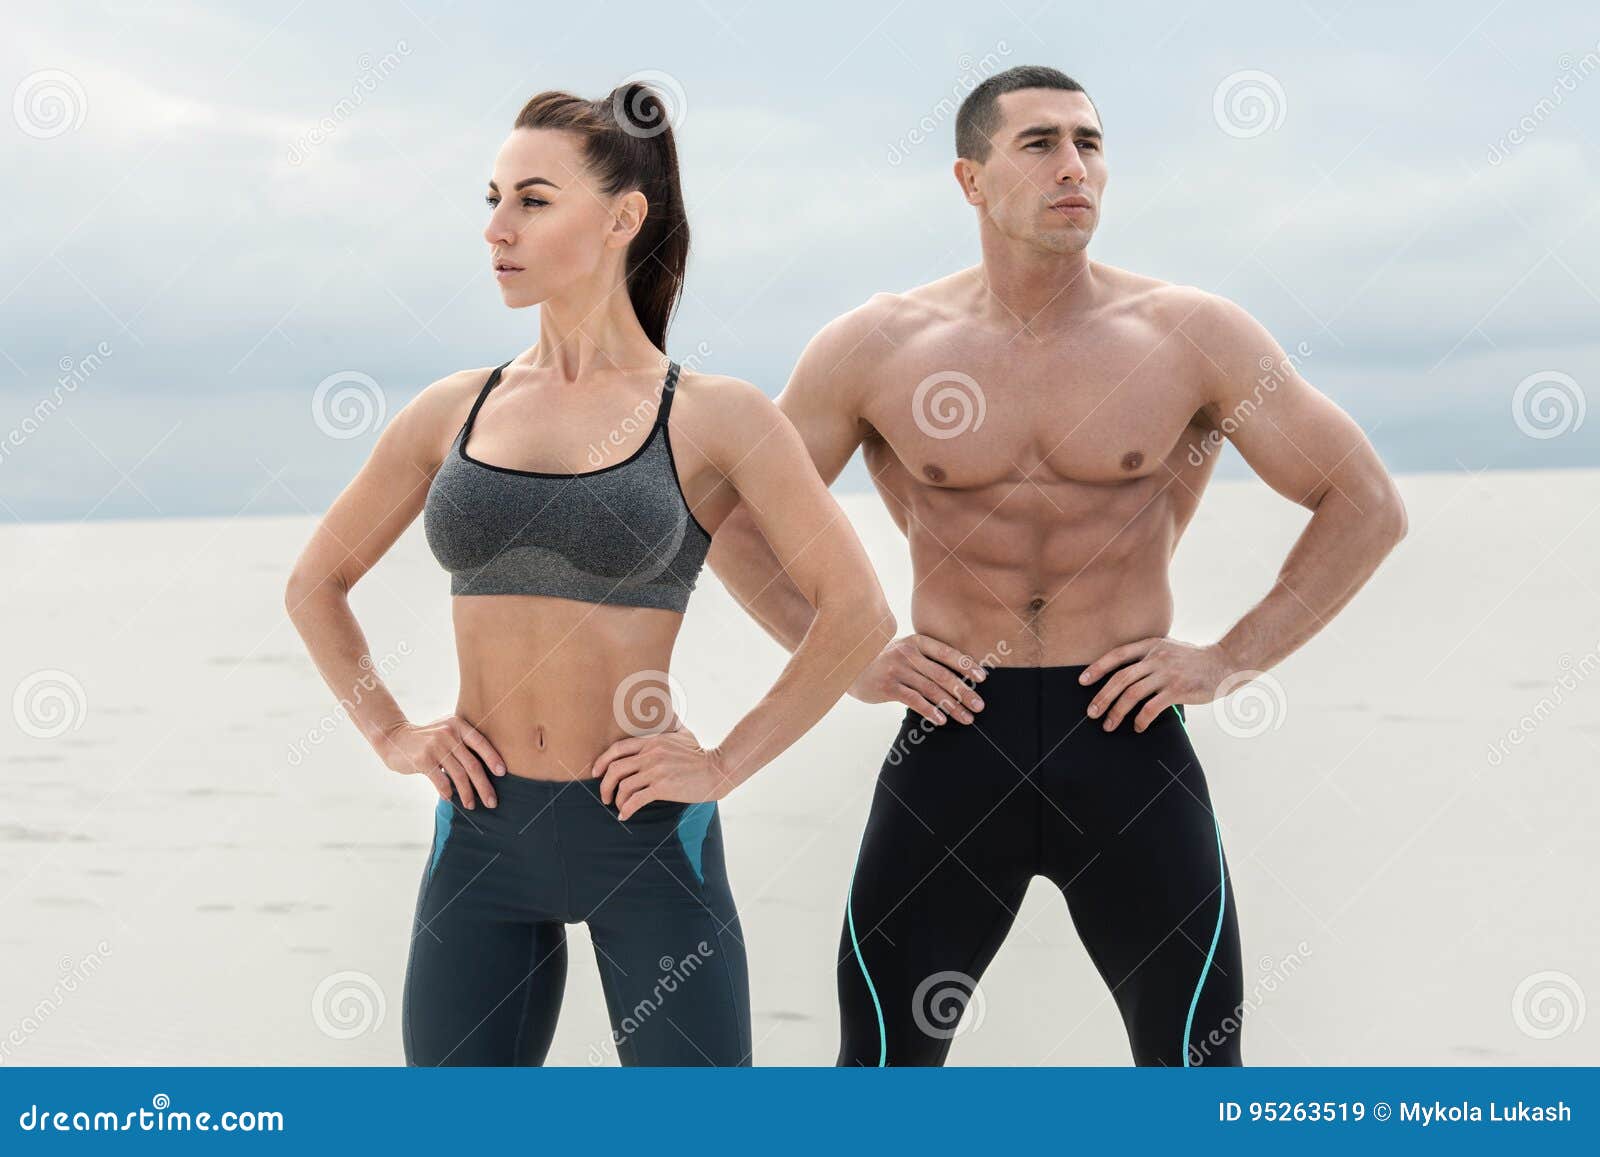 sporty fitness couple showing muscle outdoors. beautiful athletic man and woman, muscular torso abs